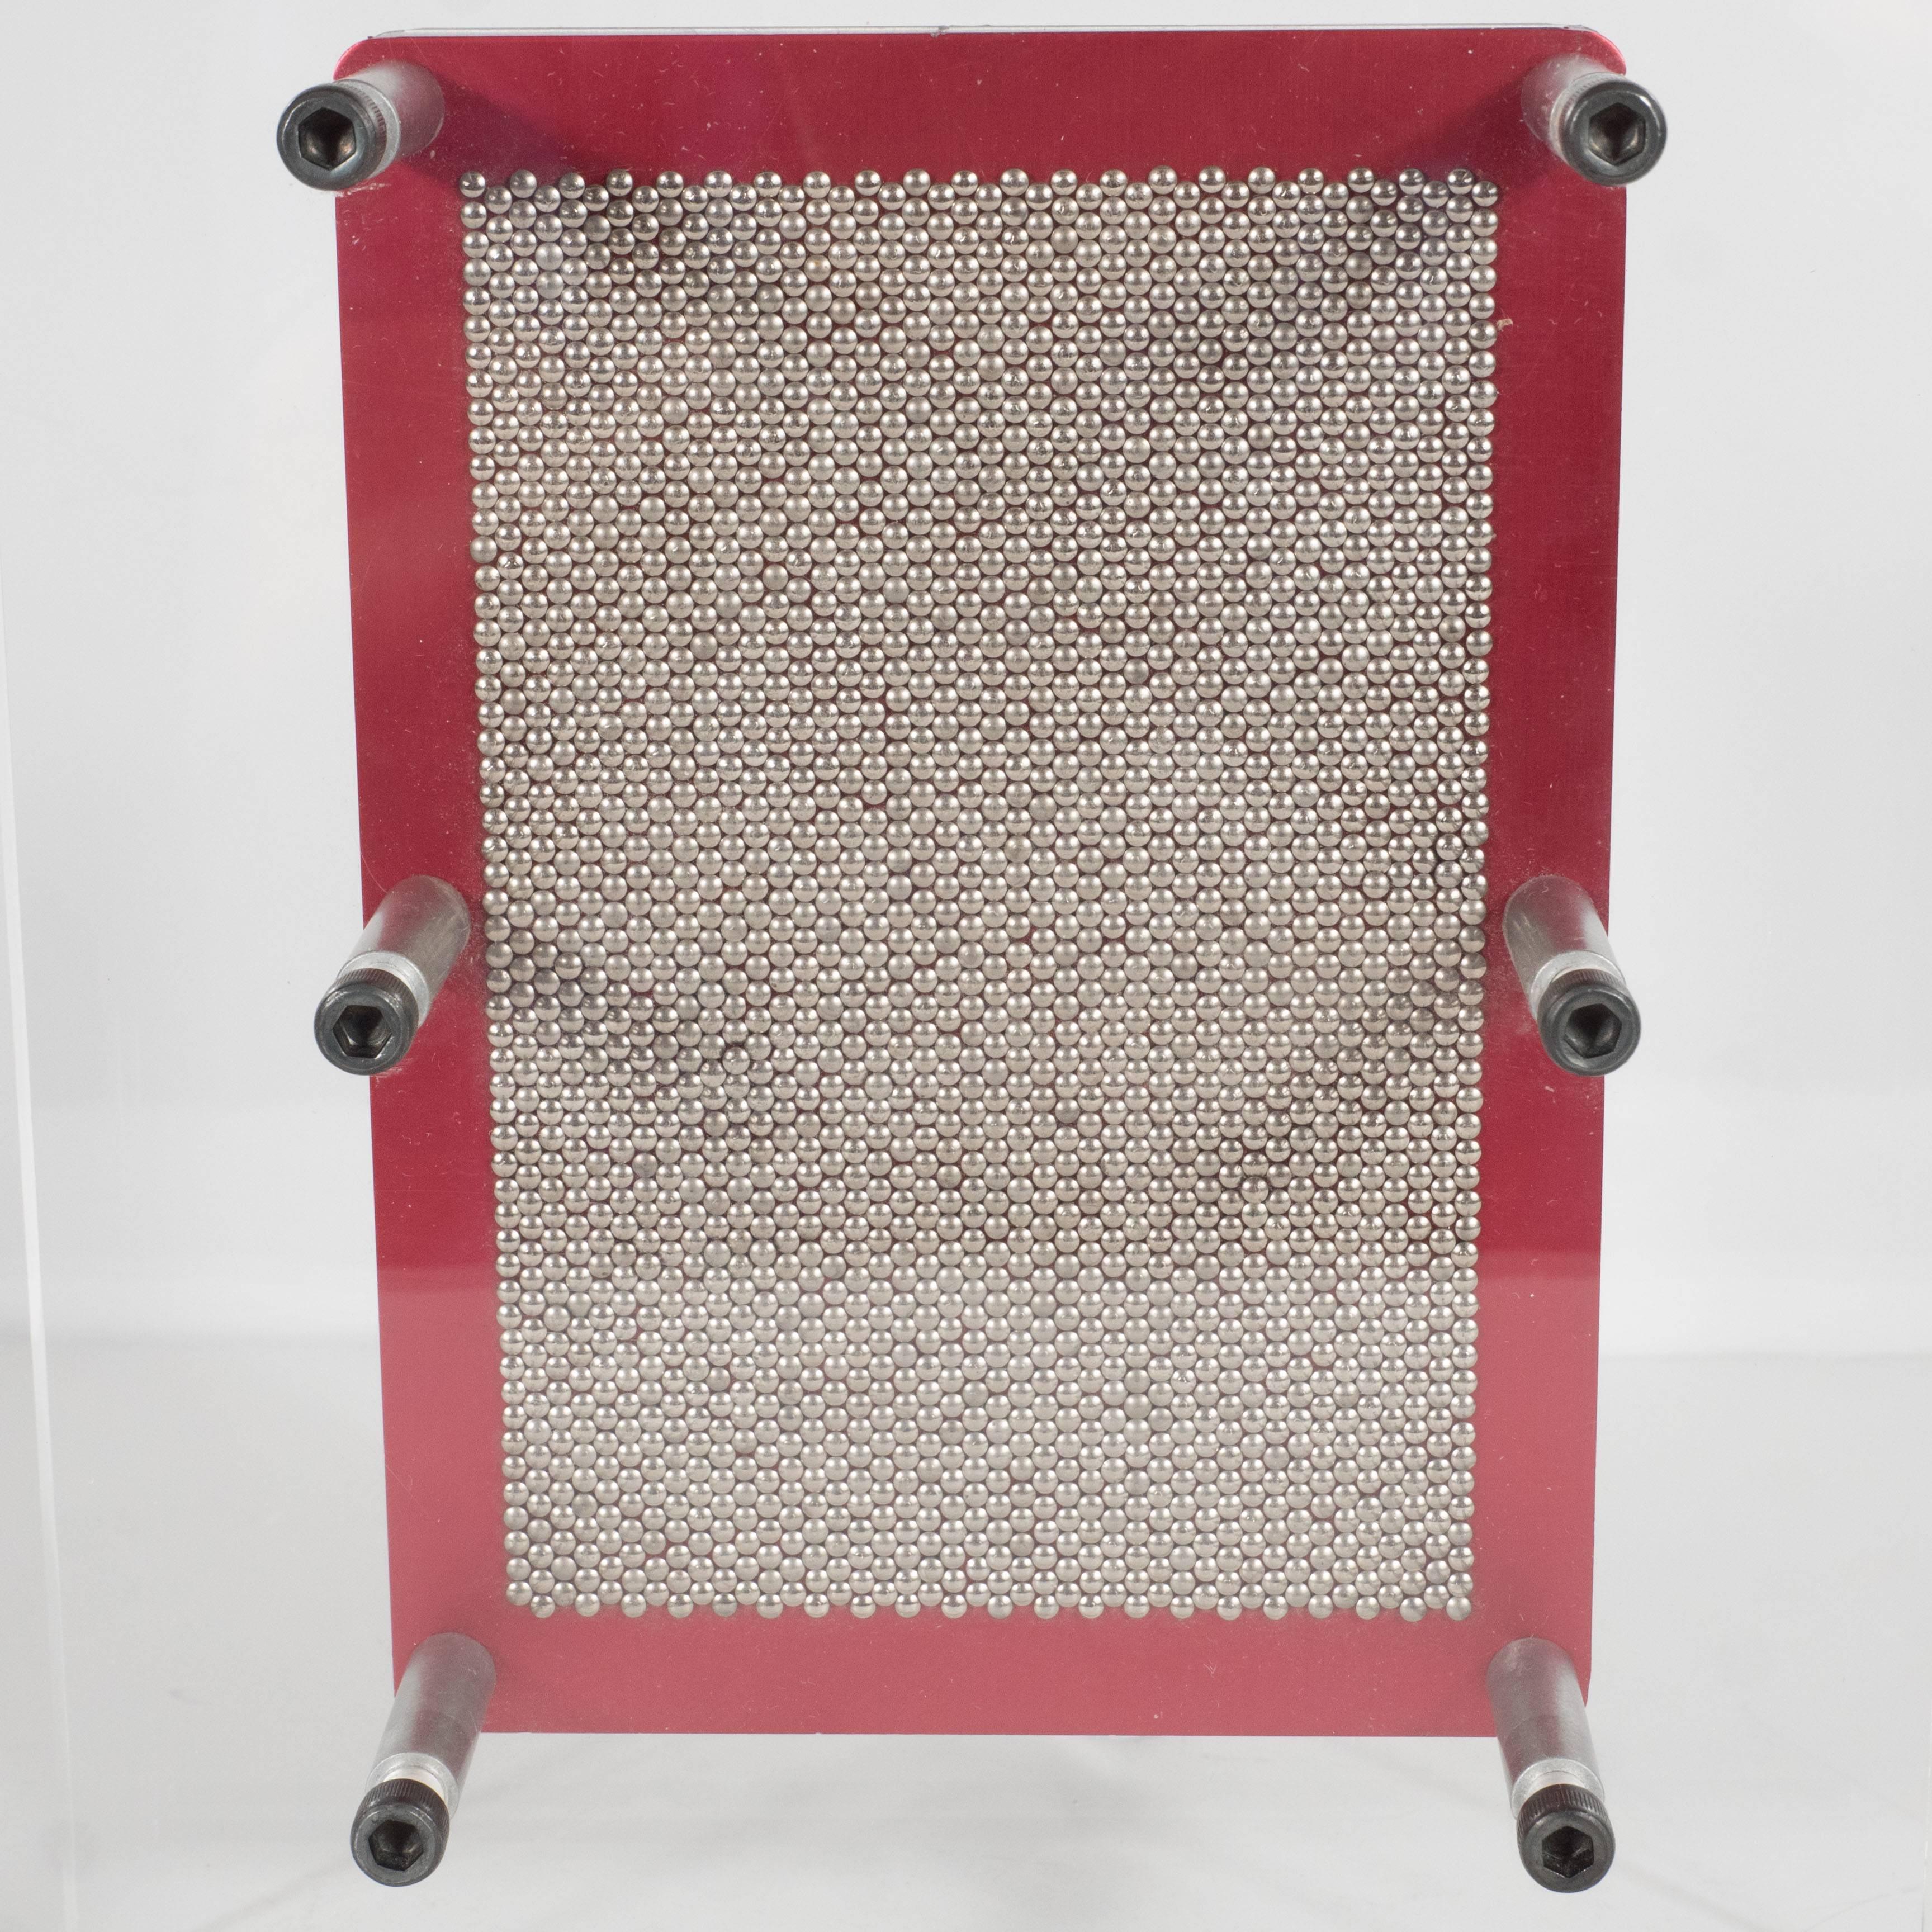 A Mid-Century pin-point impression box with thick Lucite frame. Two rectangular Lucite frames support a central, floating red steel mounted plaque which holds thin, flathead nails. A temporary impression is made by pressing on the narrow protruding